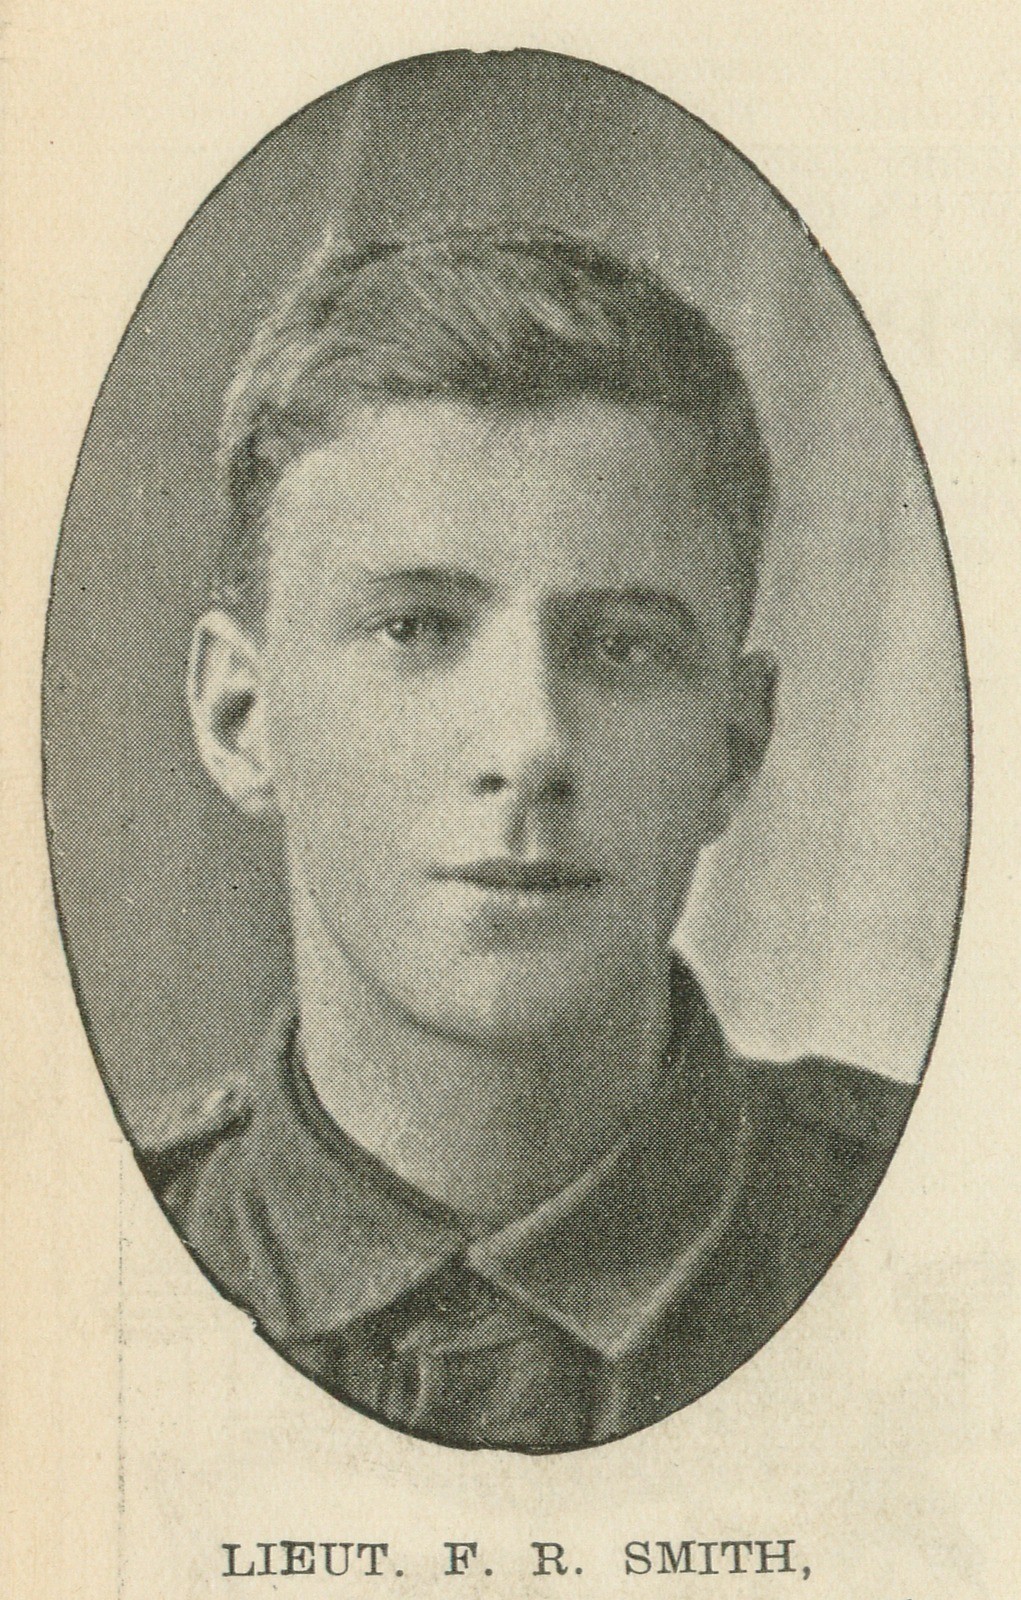 Lieut. F.R. Smith, one of the soldiers photographed in The Queenslander Pictorial, supplement to The Queenslander, 1916,